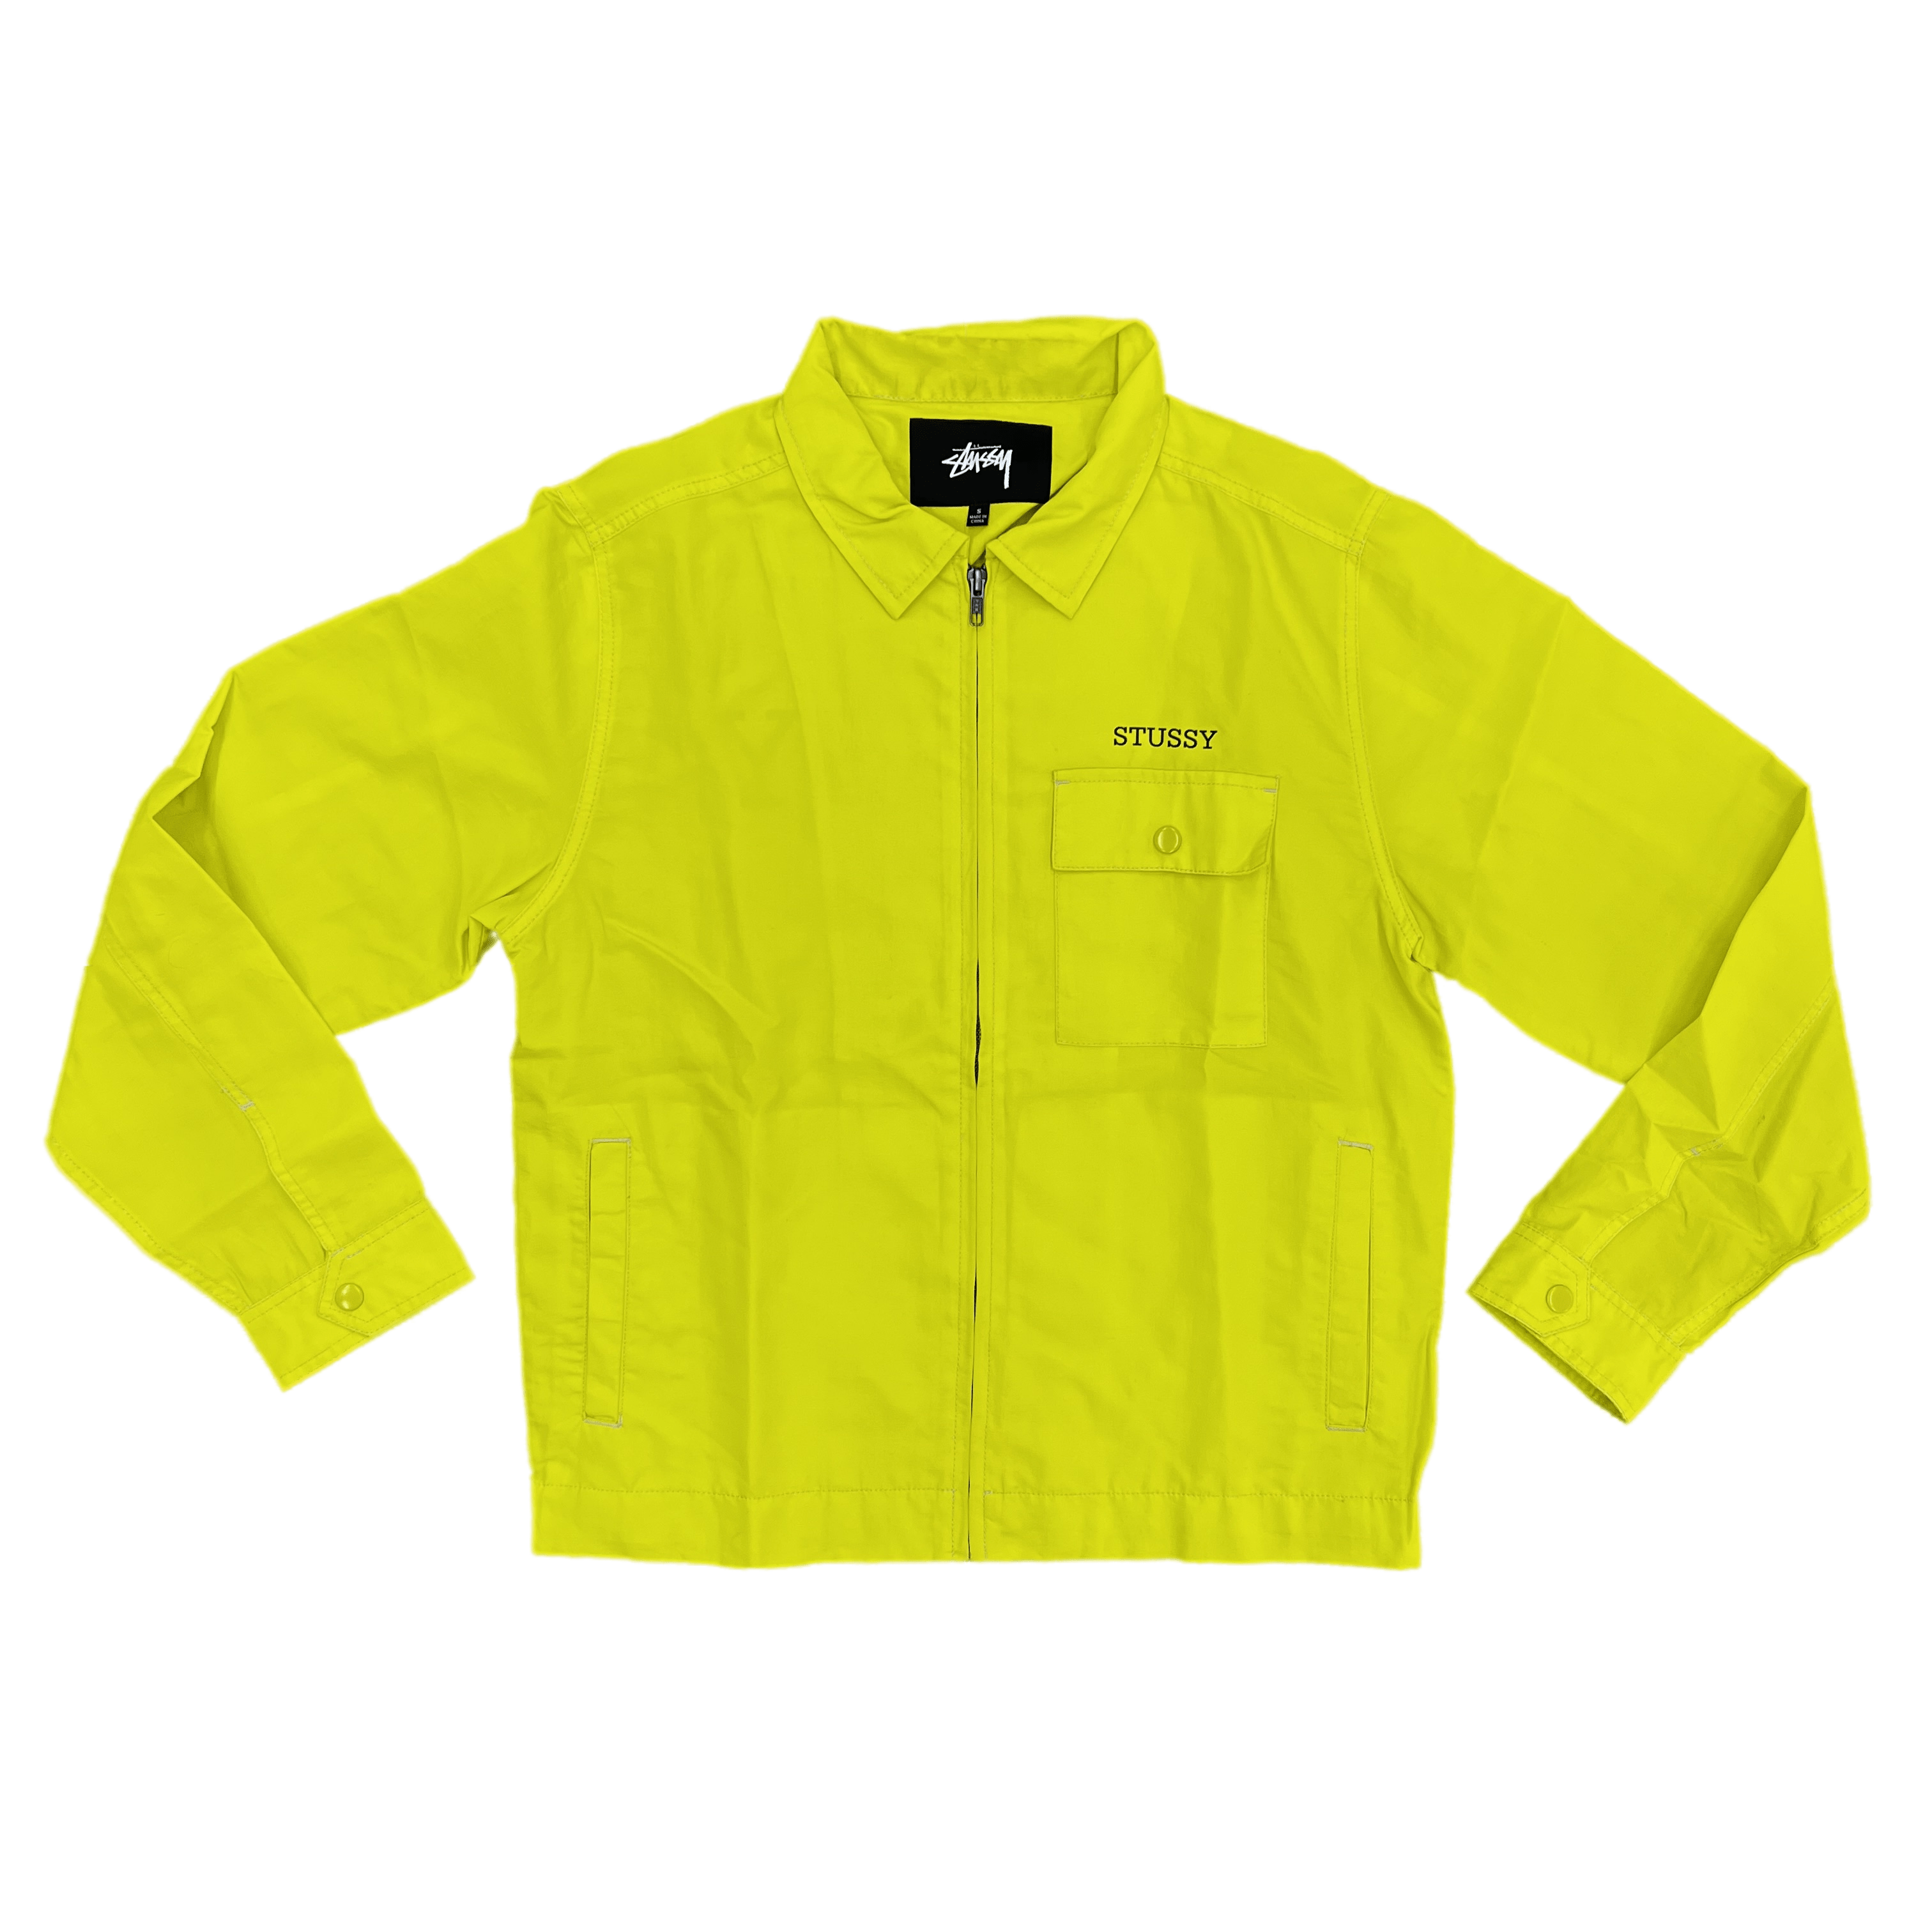 PRE-LOVED STUSSY YELLOW JACKET